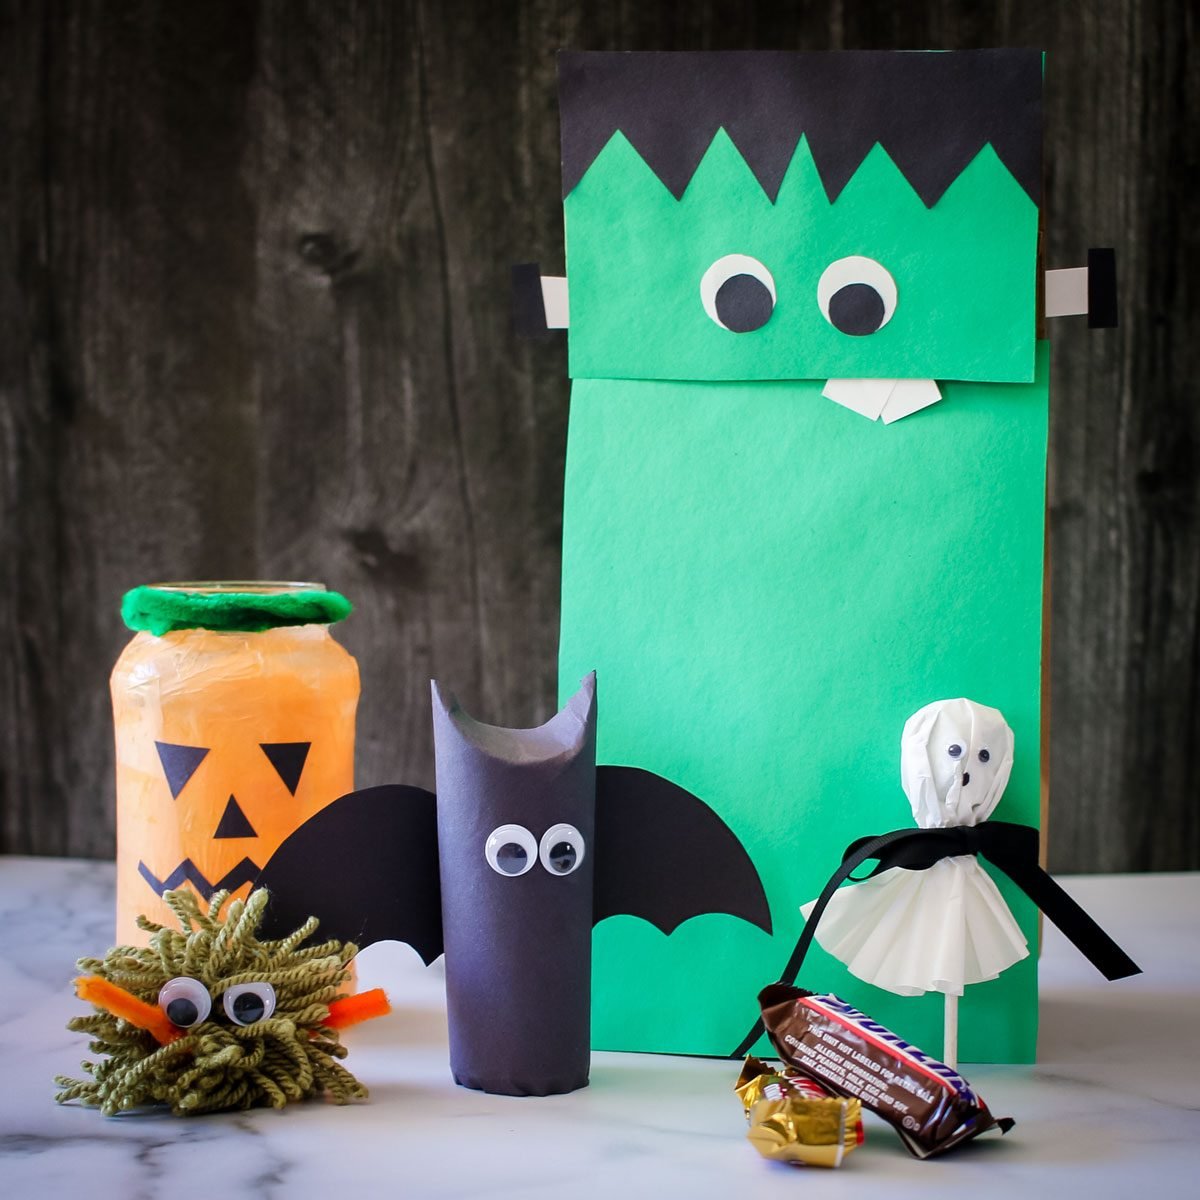 5 Easy Halloween Crafts for Kids in 2022 | The Family Handyman